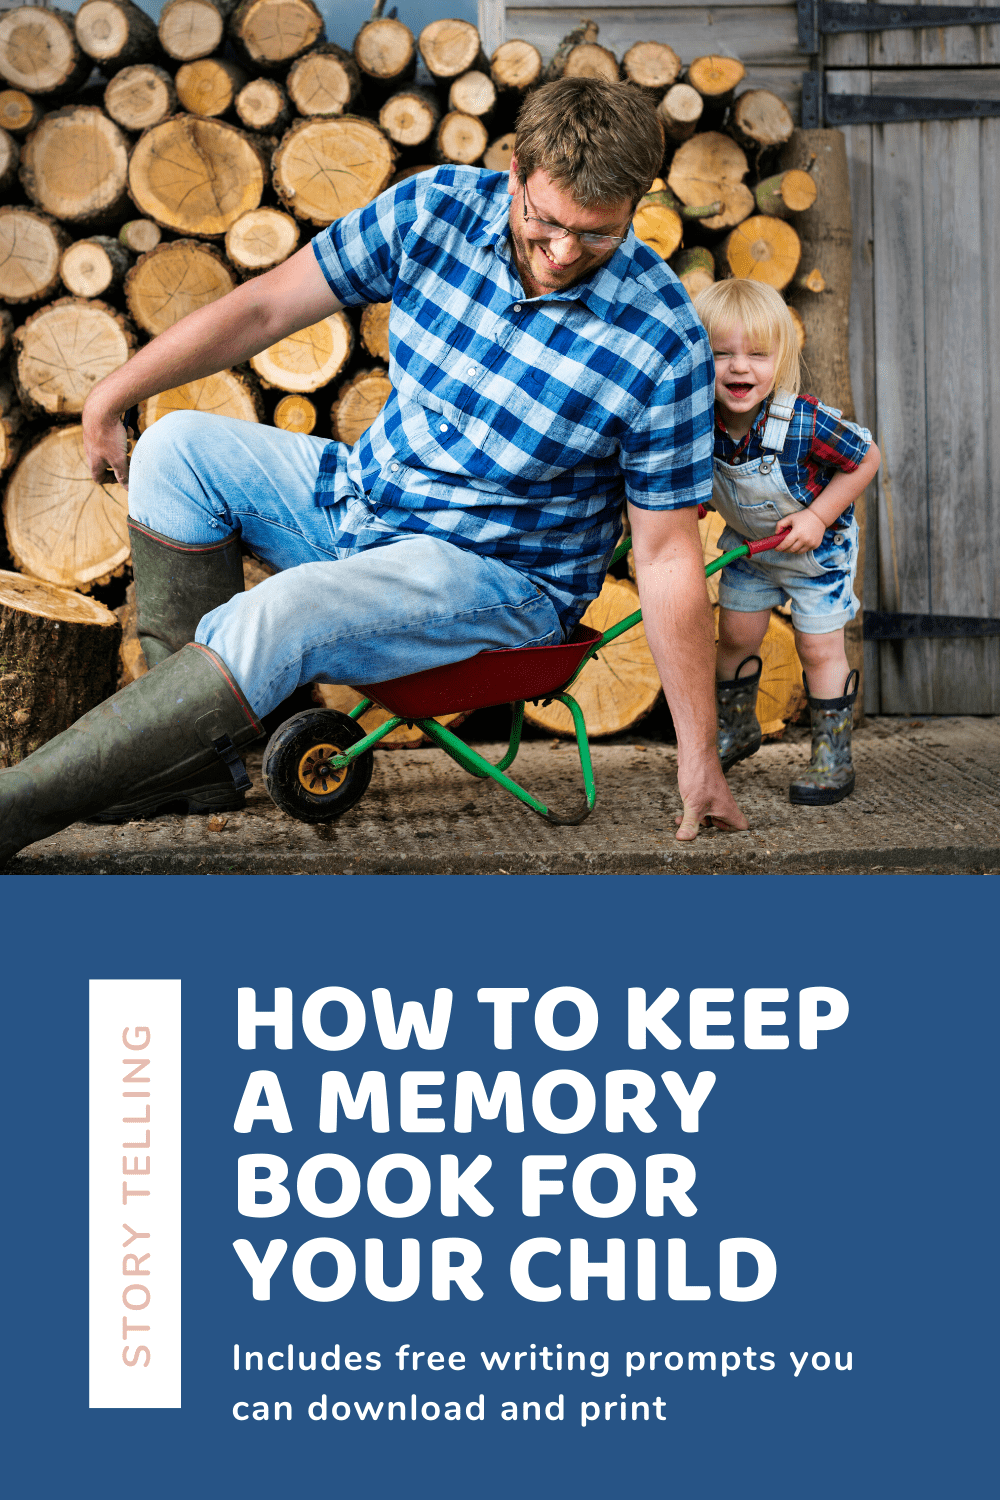 Find out how easy it is to keep a memory book for your child and get your free writing prompts to get started telling their story. 